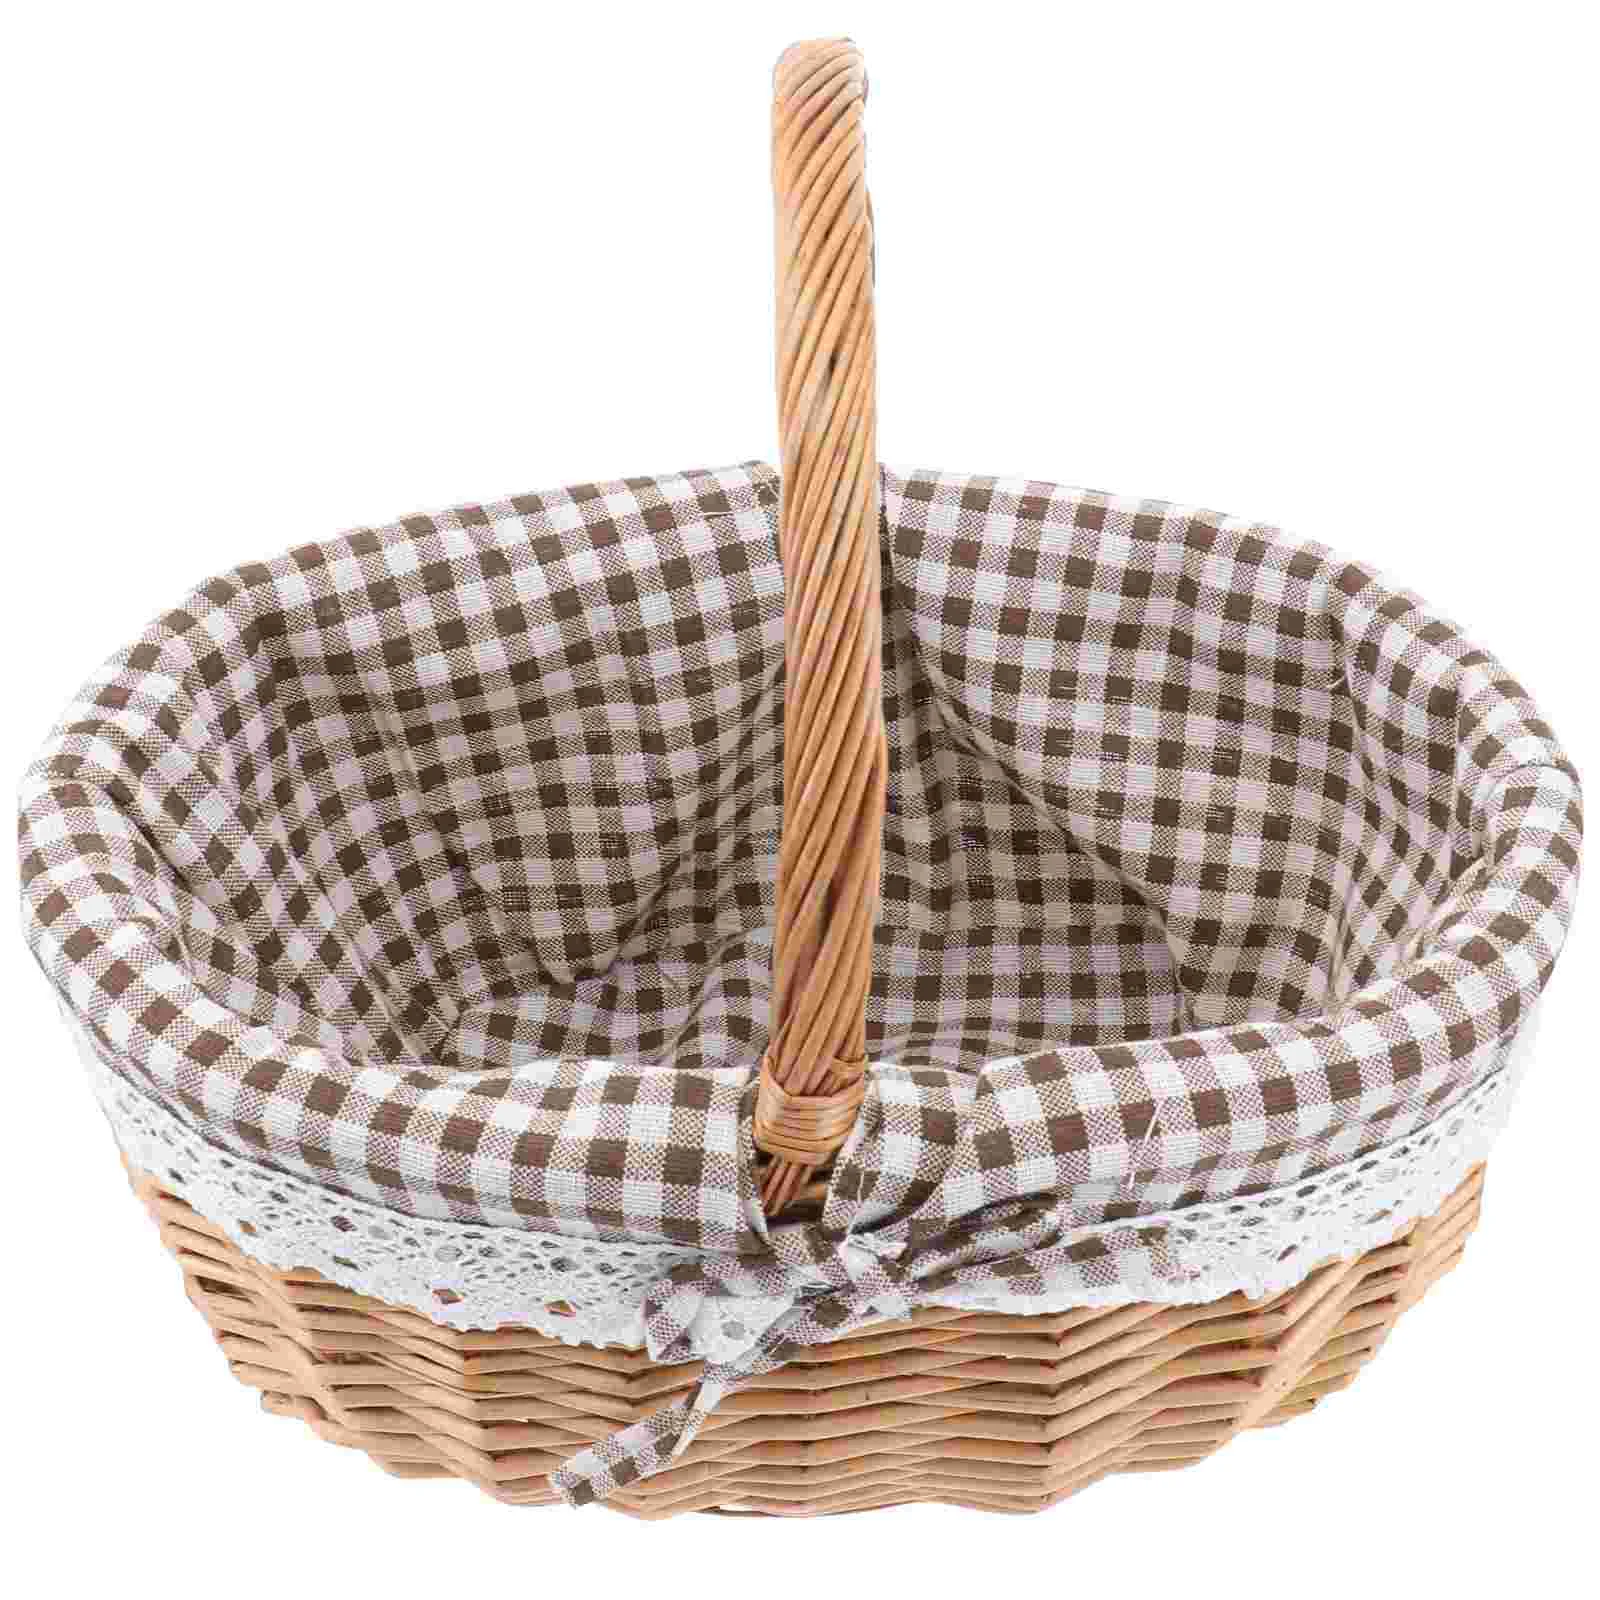 Bread Container Wicker Storage Basket Little Red Riding Hood Bamboo Bride Picnic Bag